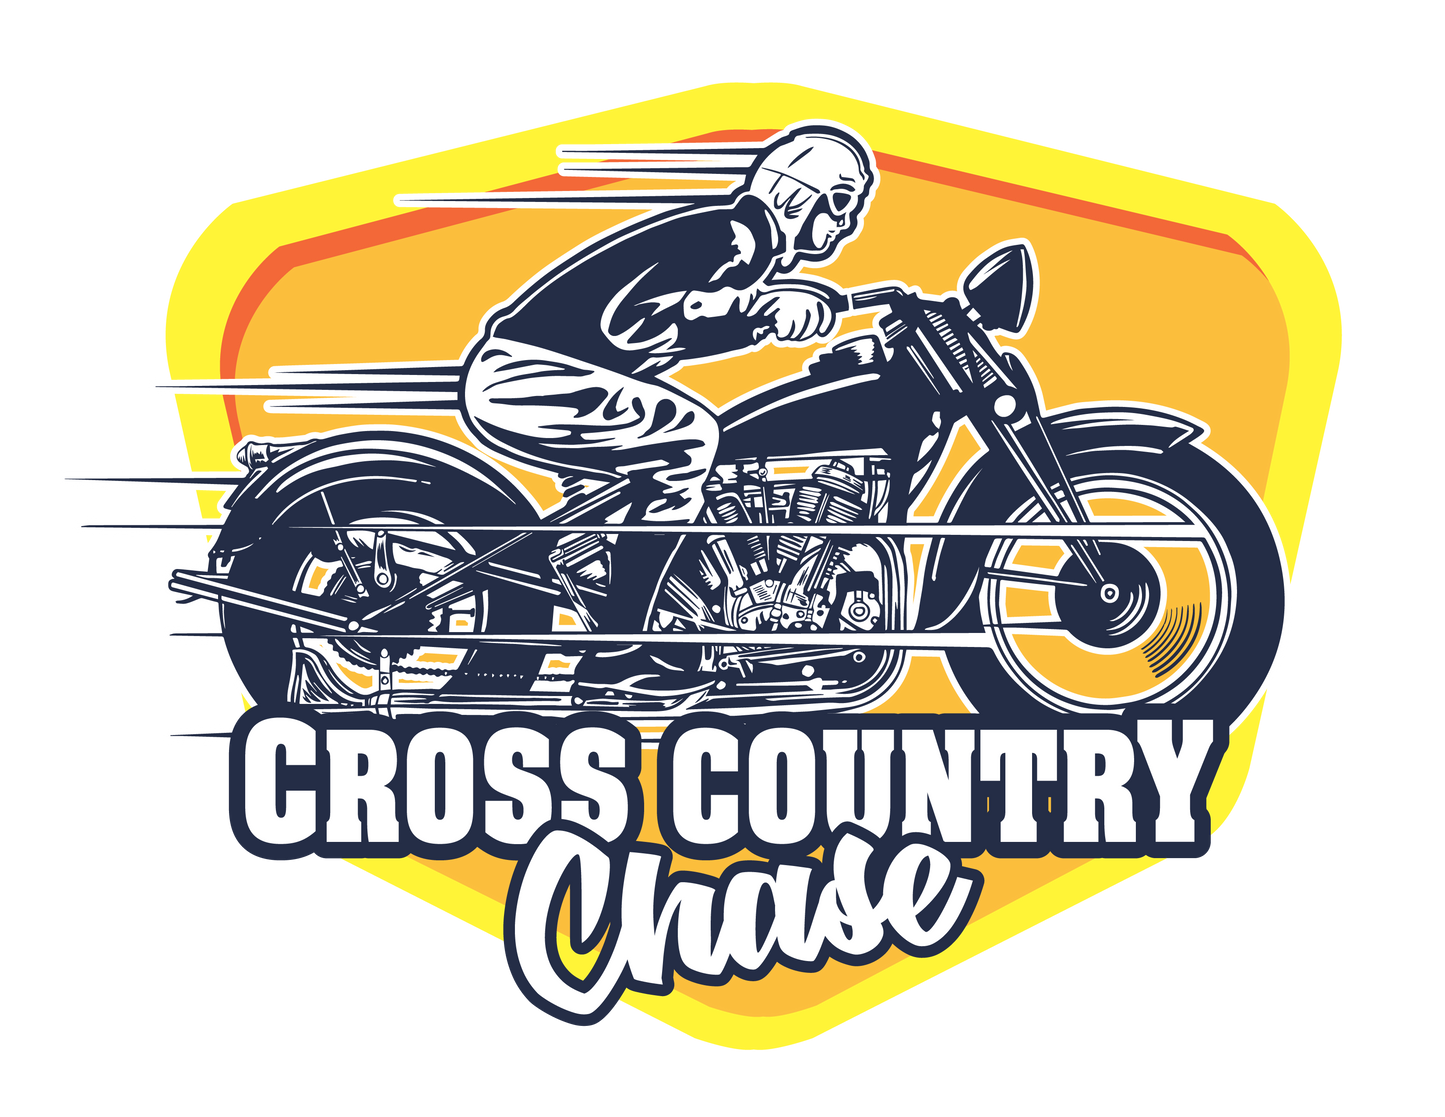 Sponsor a Young Rider for the Cross Country Chase 2022